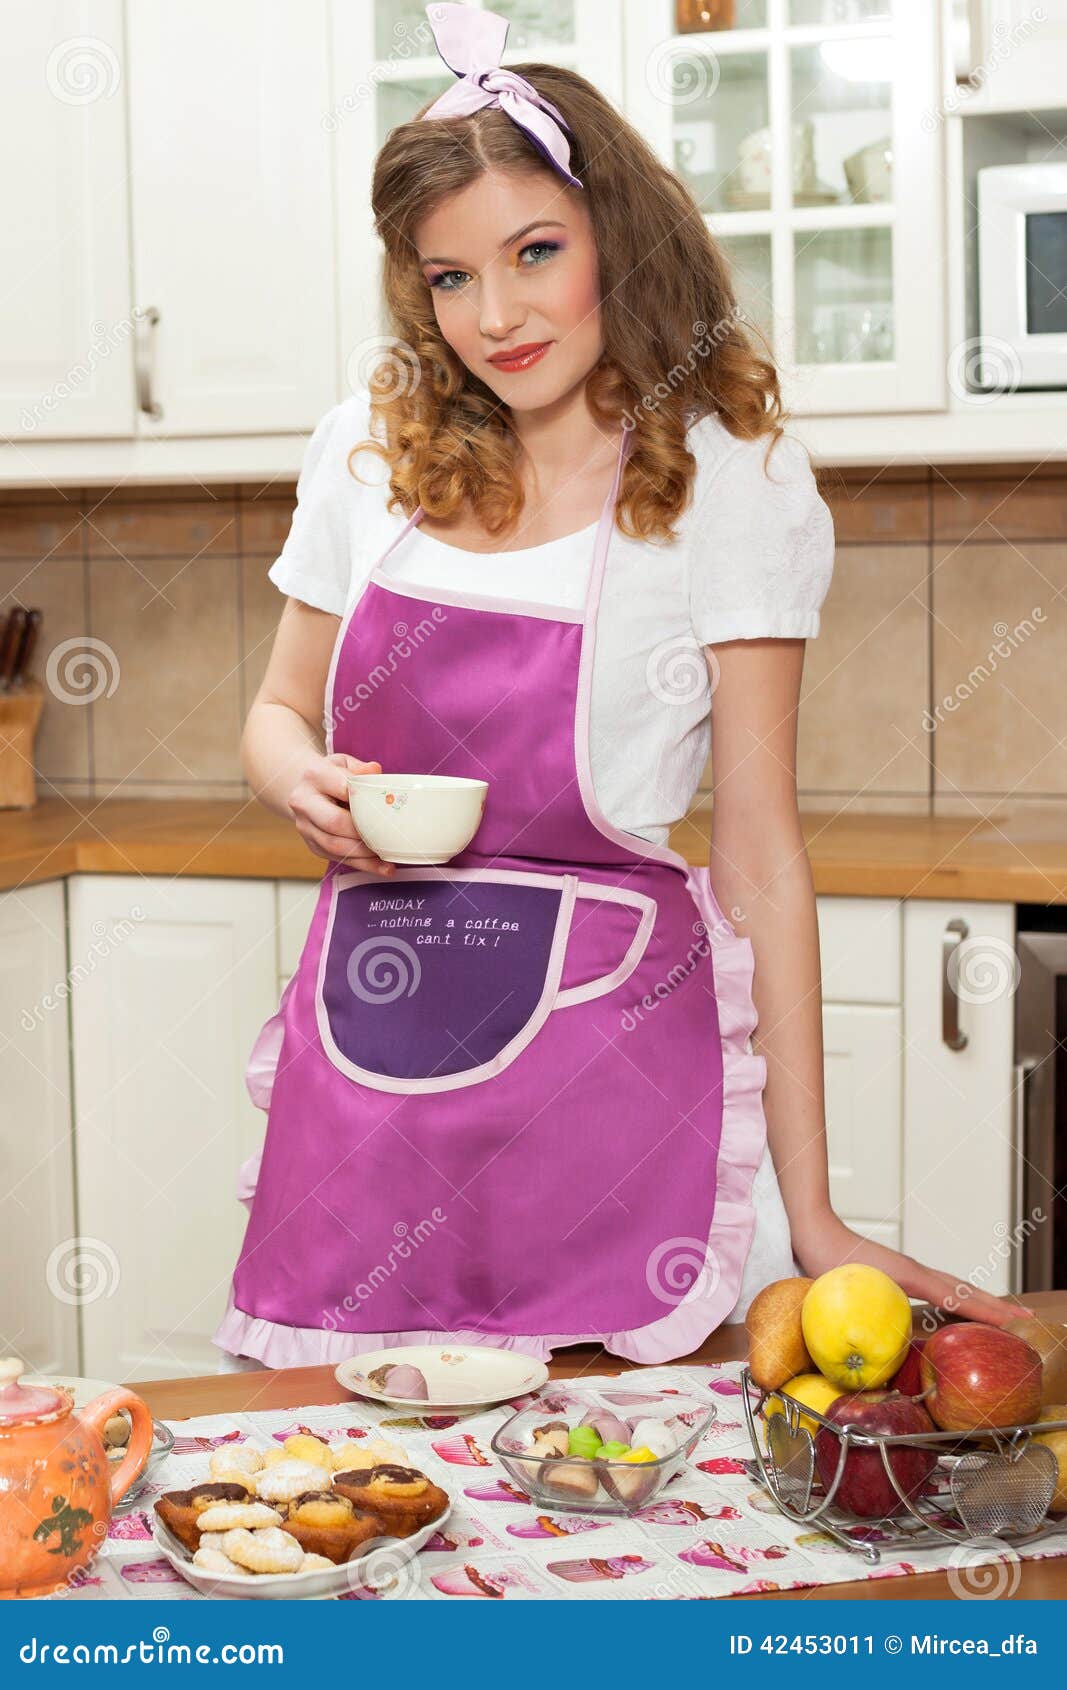 Woman In The Kitchen Stock Image Image Of Makeup La